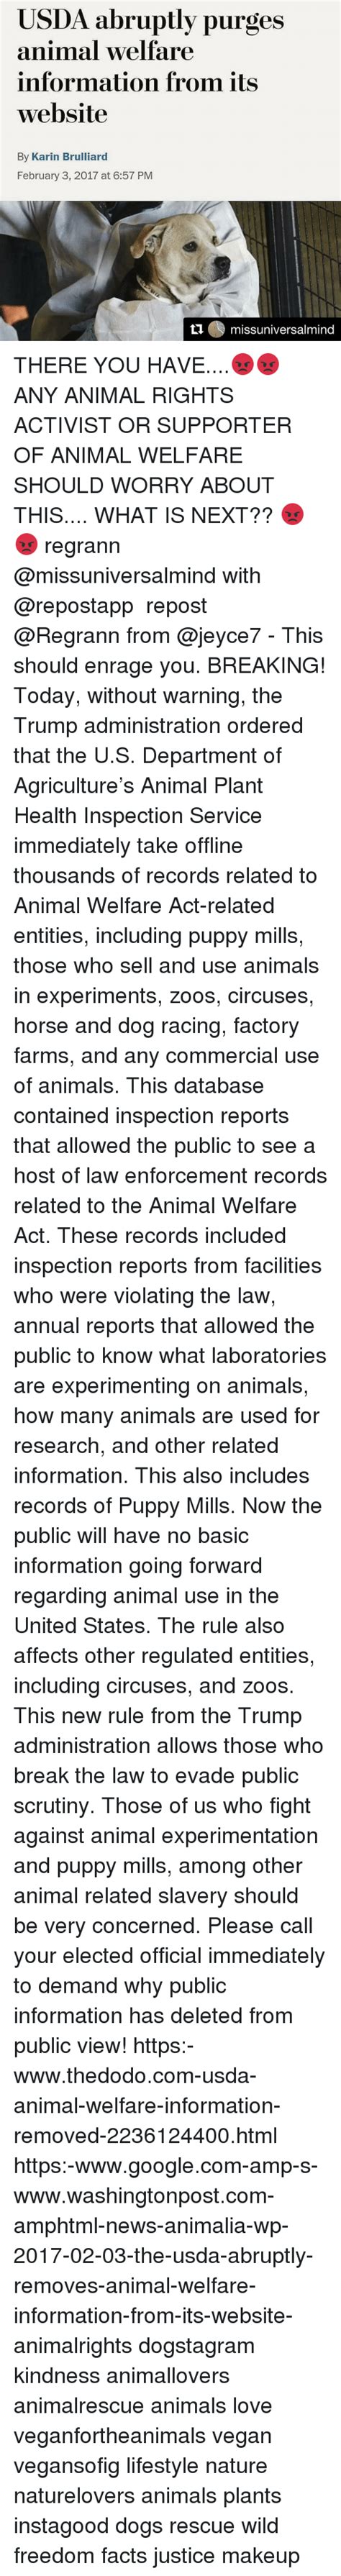 Usda Abruptly Purges Animal Welfare Information From Its Website By